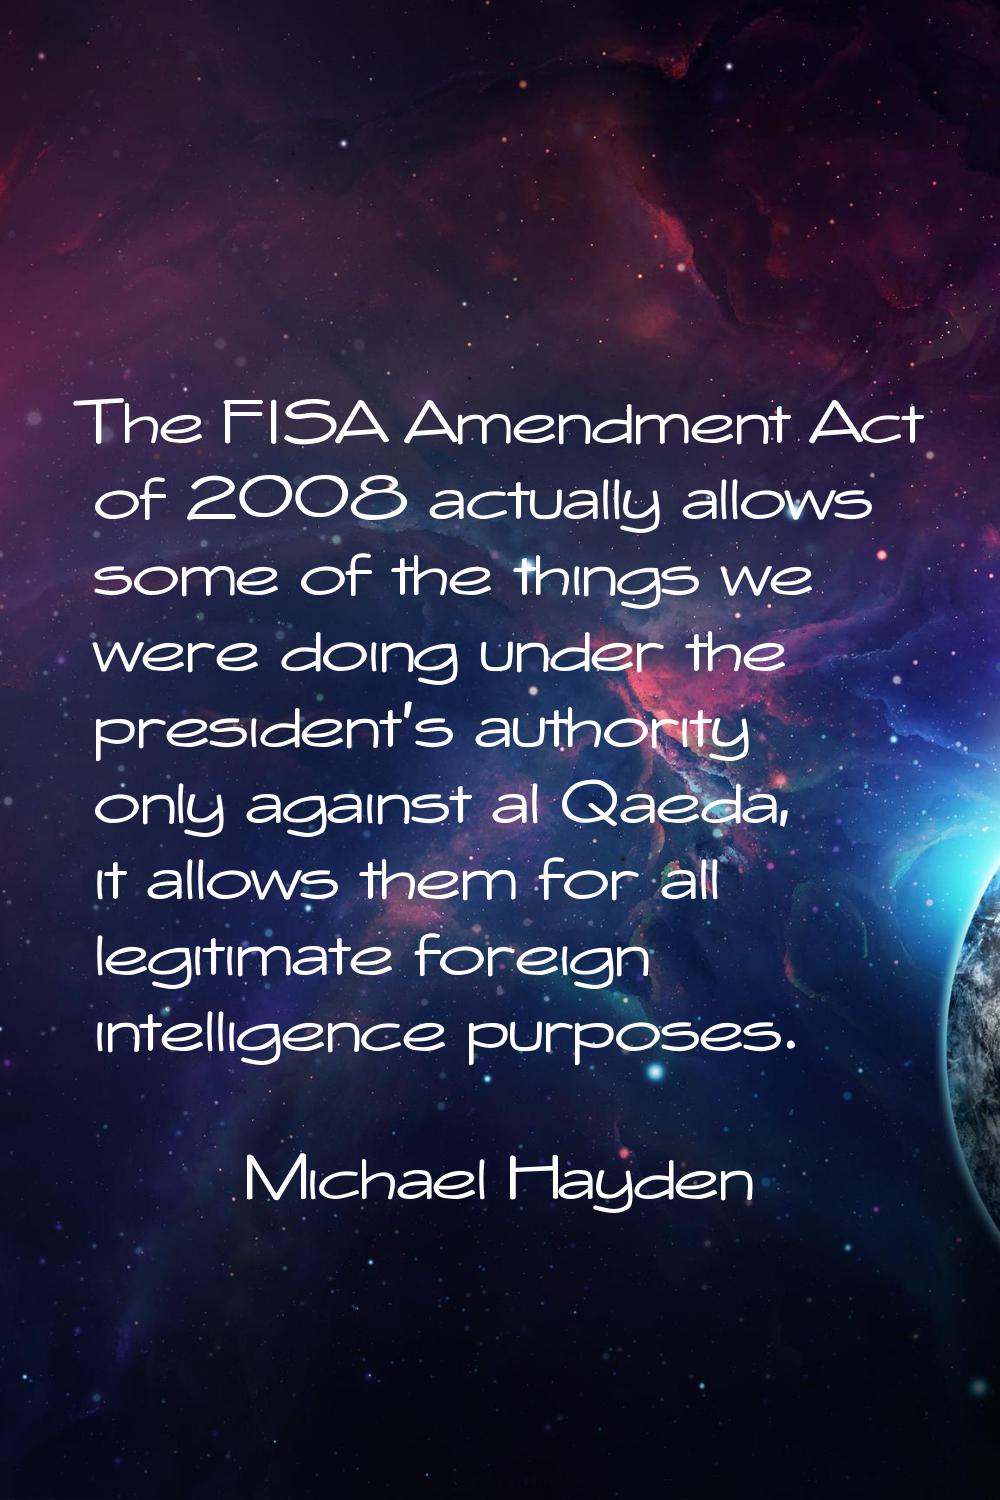 The FISA Amendment Act of 2008 actually allows some of the things we were doing under the president